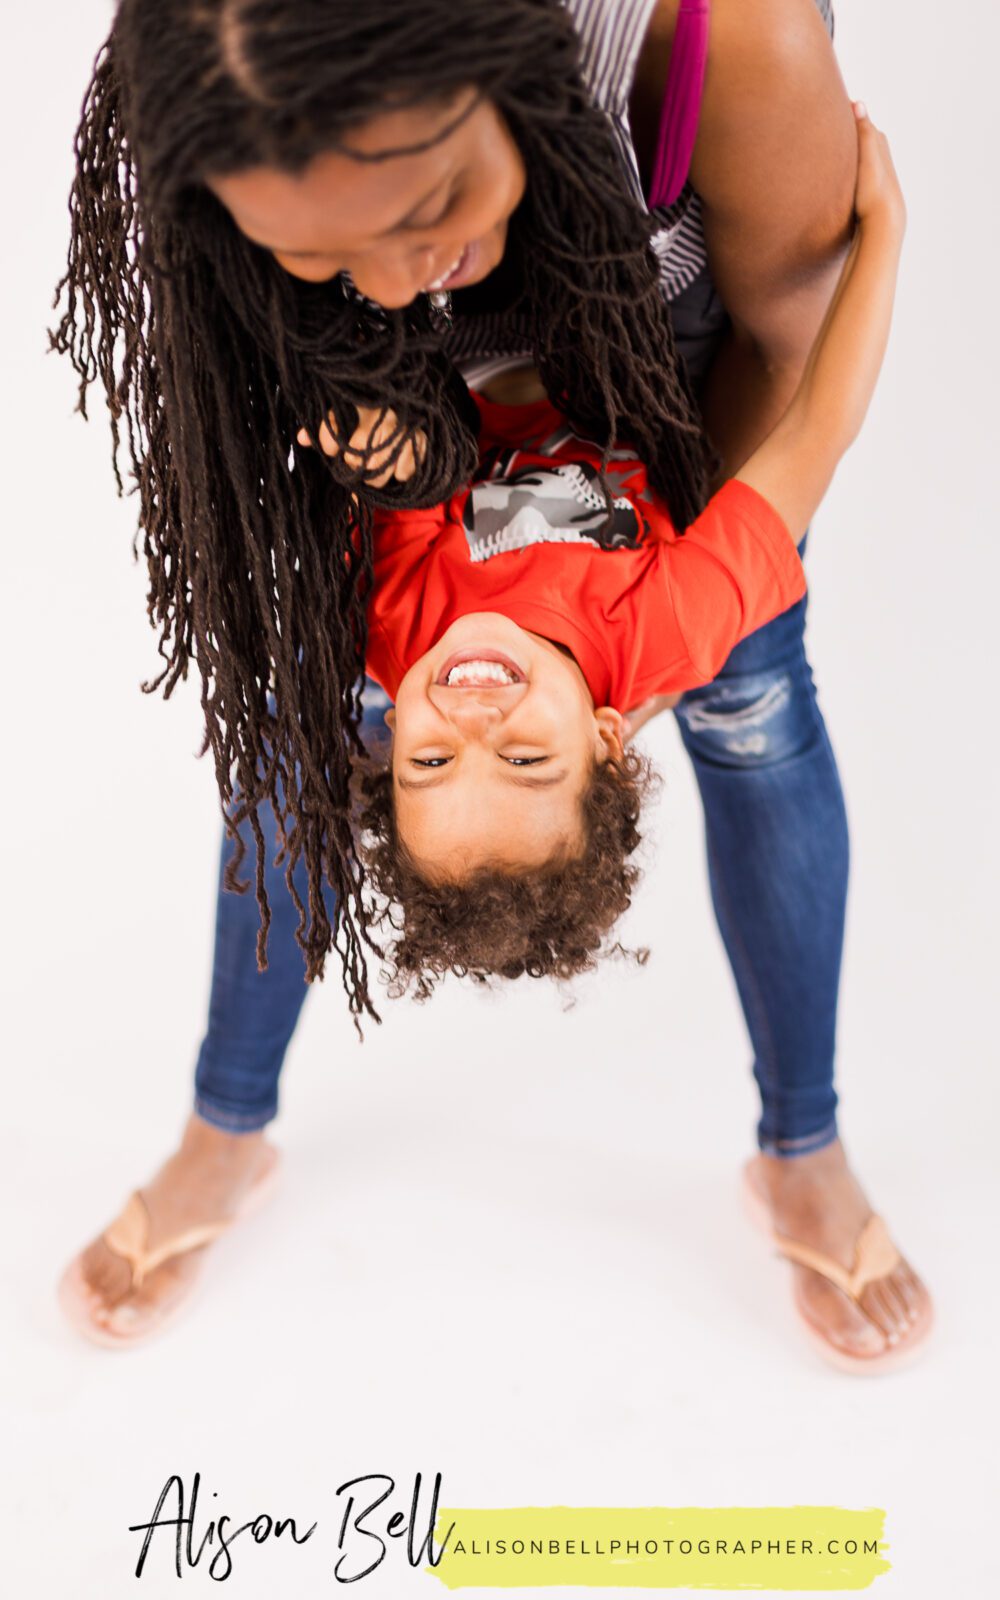 Master Family Photographer Certification from National association of professional child photgraphers by Alison Bell 